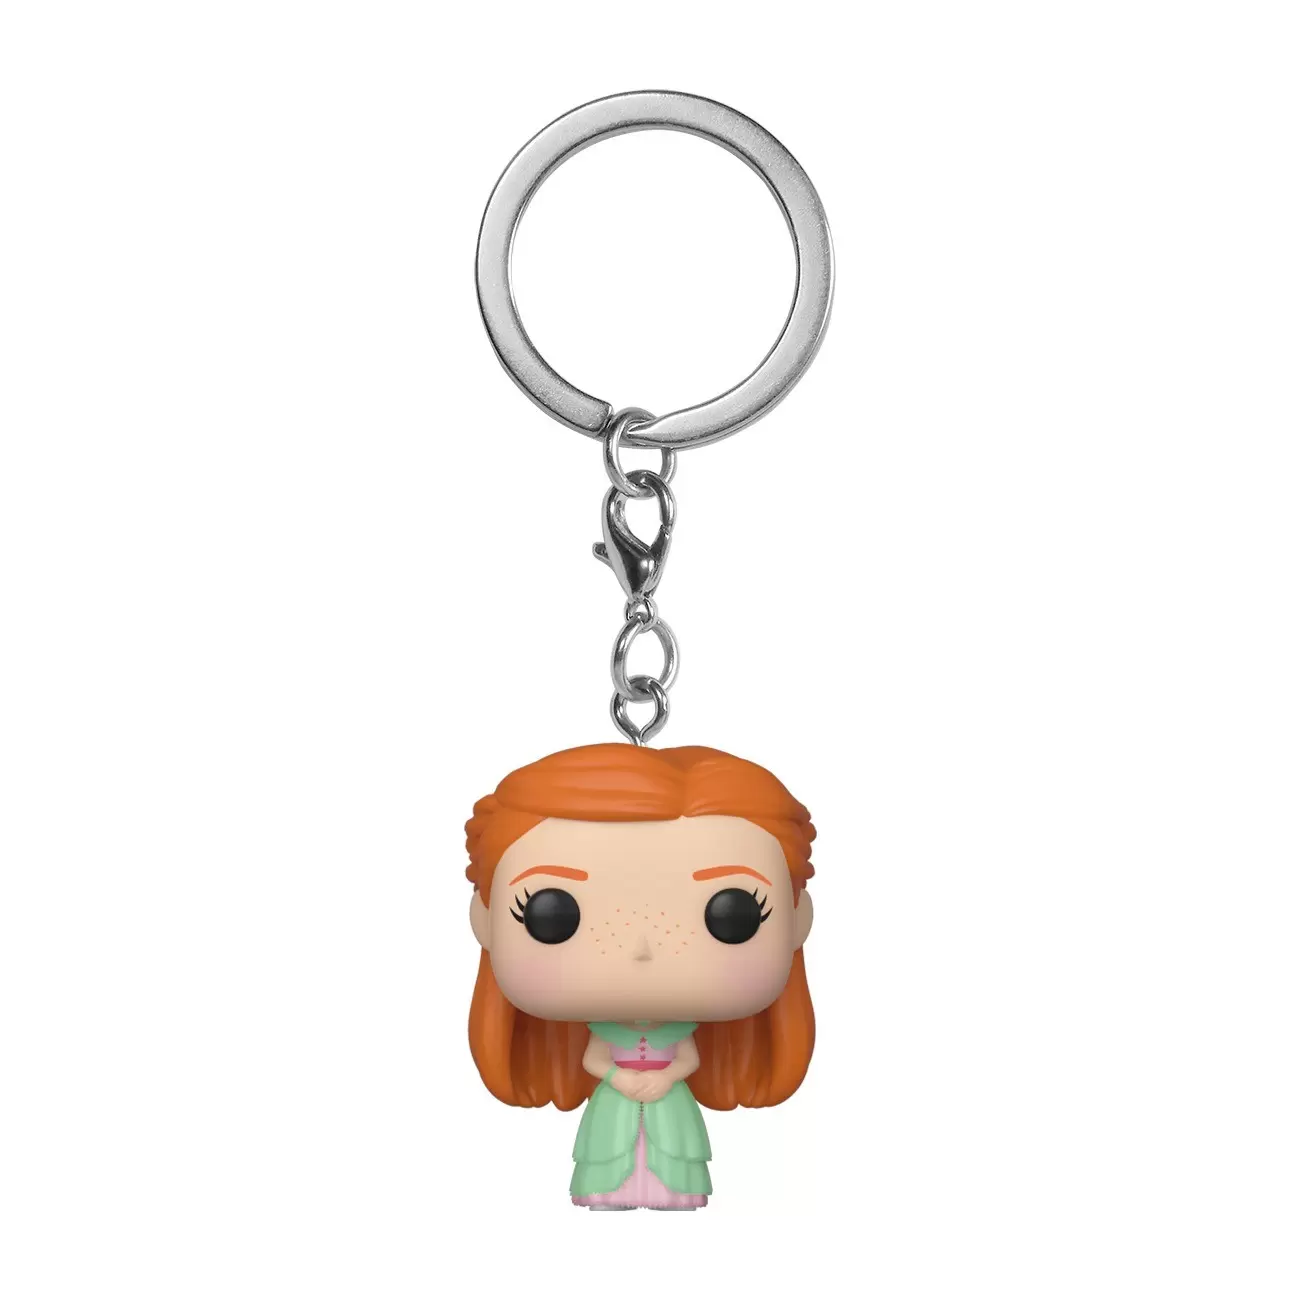 Harry Potter and Fantastic Beasts - POP! Keychain - Ginny Weasley